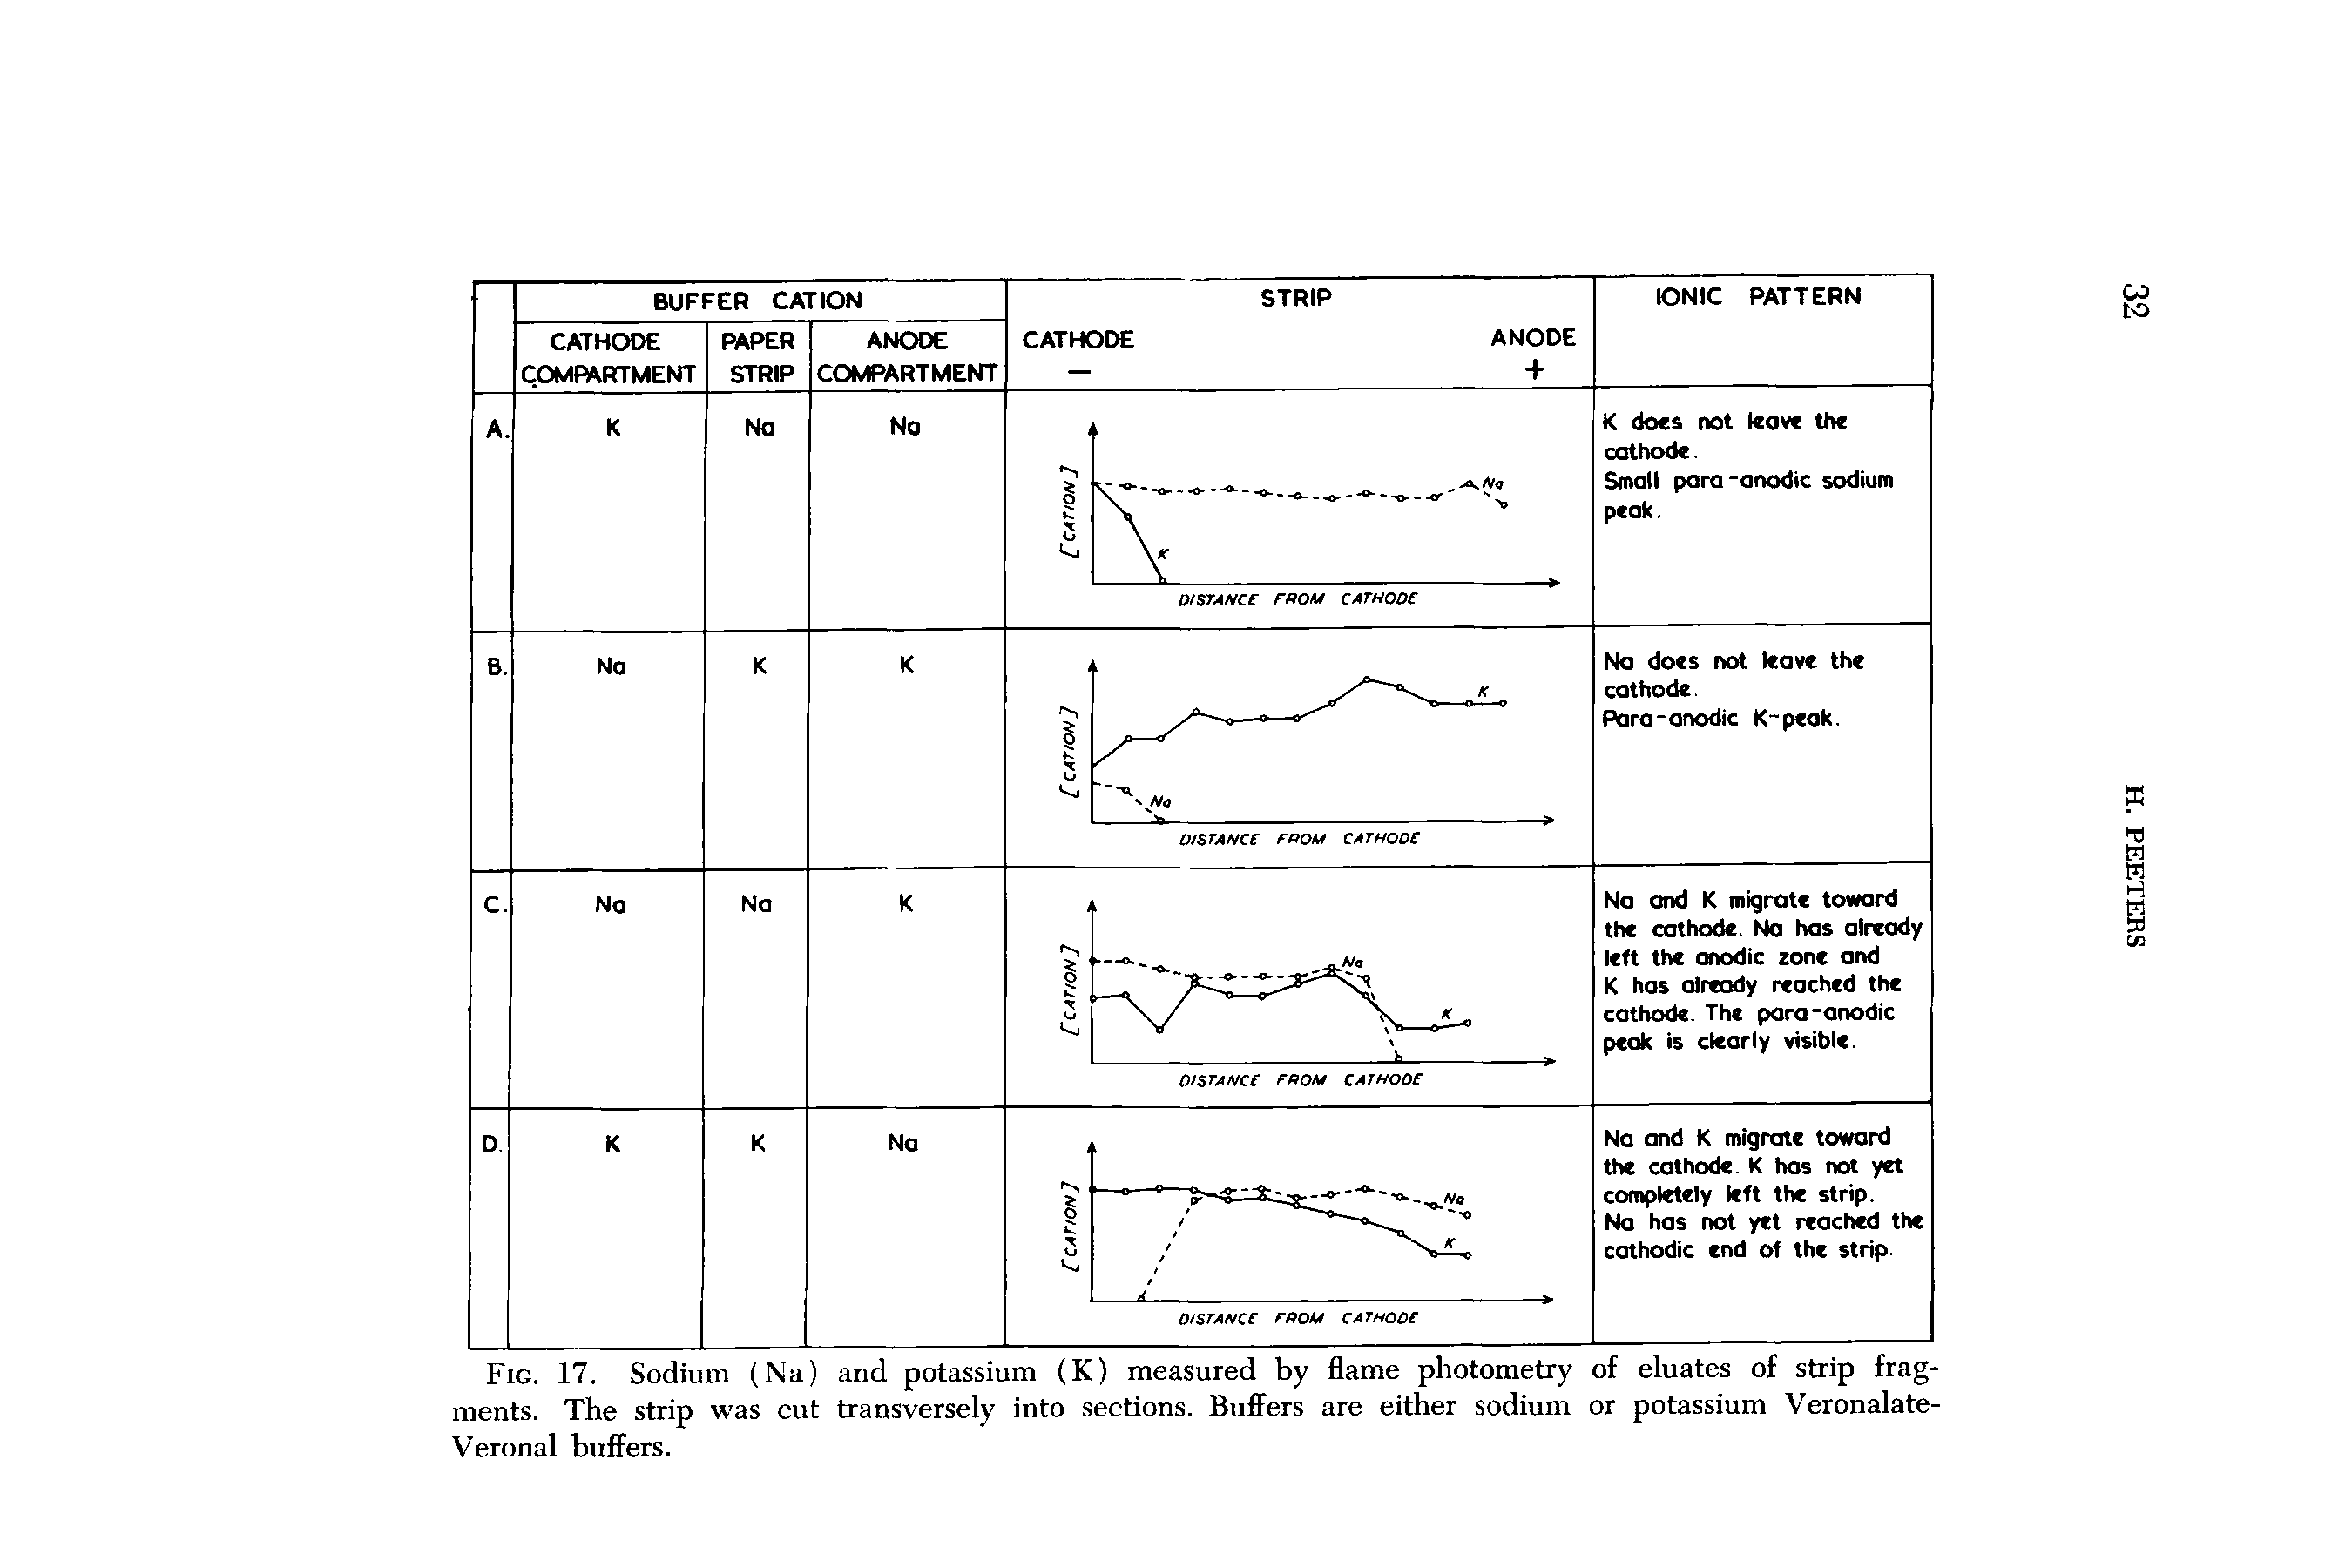 Fig. 17. Sodium (Na) and potassium (K) measured by flame photometry of eluates of strip fragments. The strip was cut transversely into sections. Buffers are either sodium or potassium Veronalate-Veronal buffers.